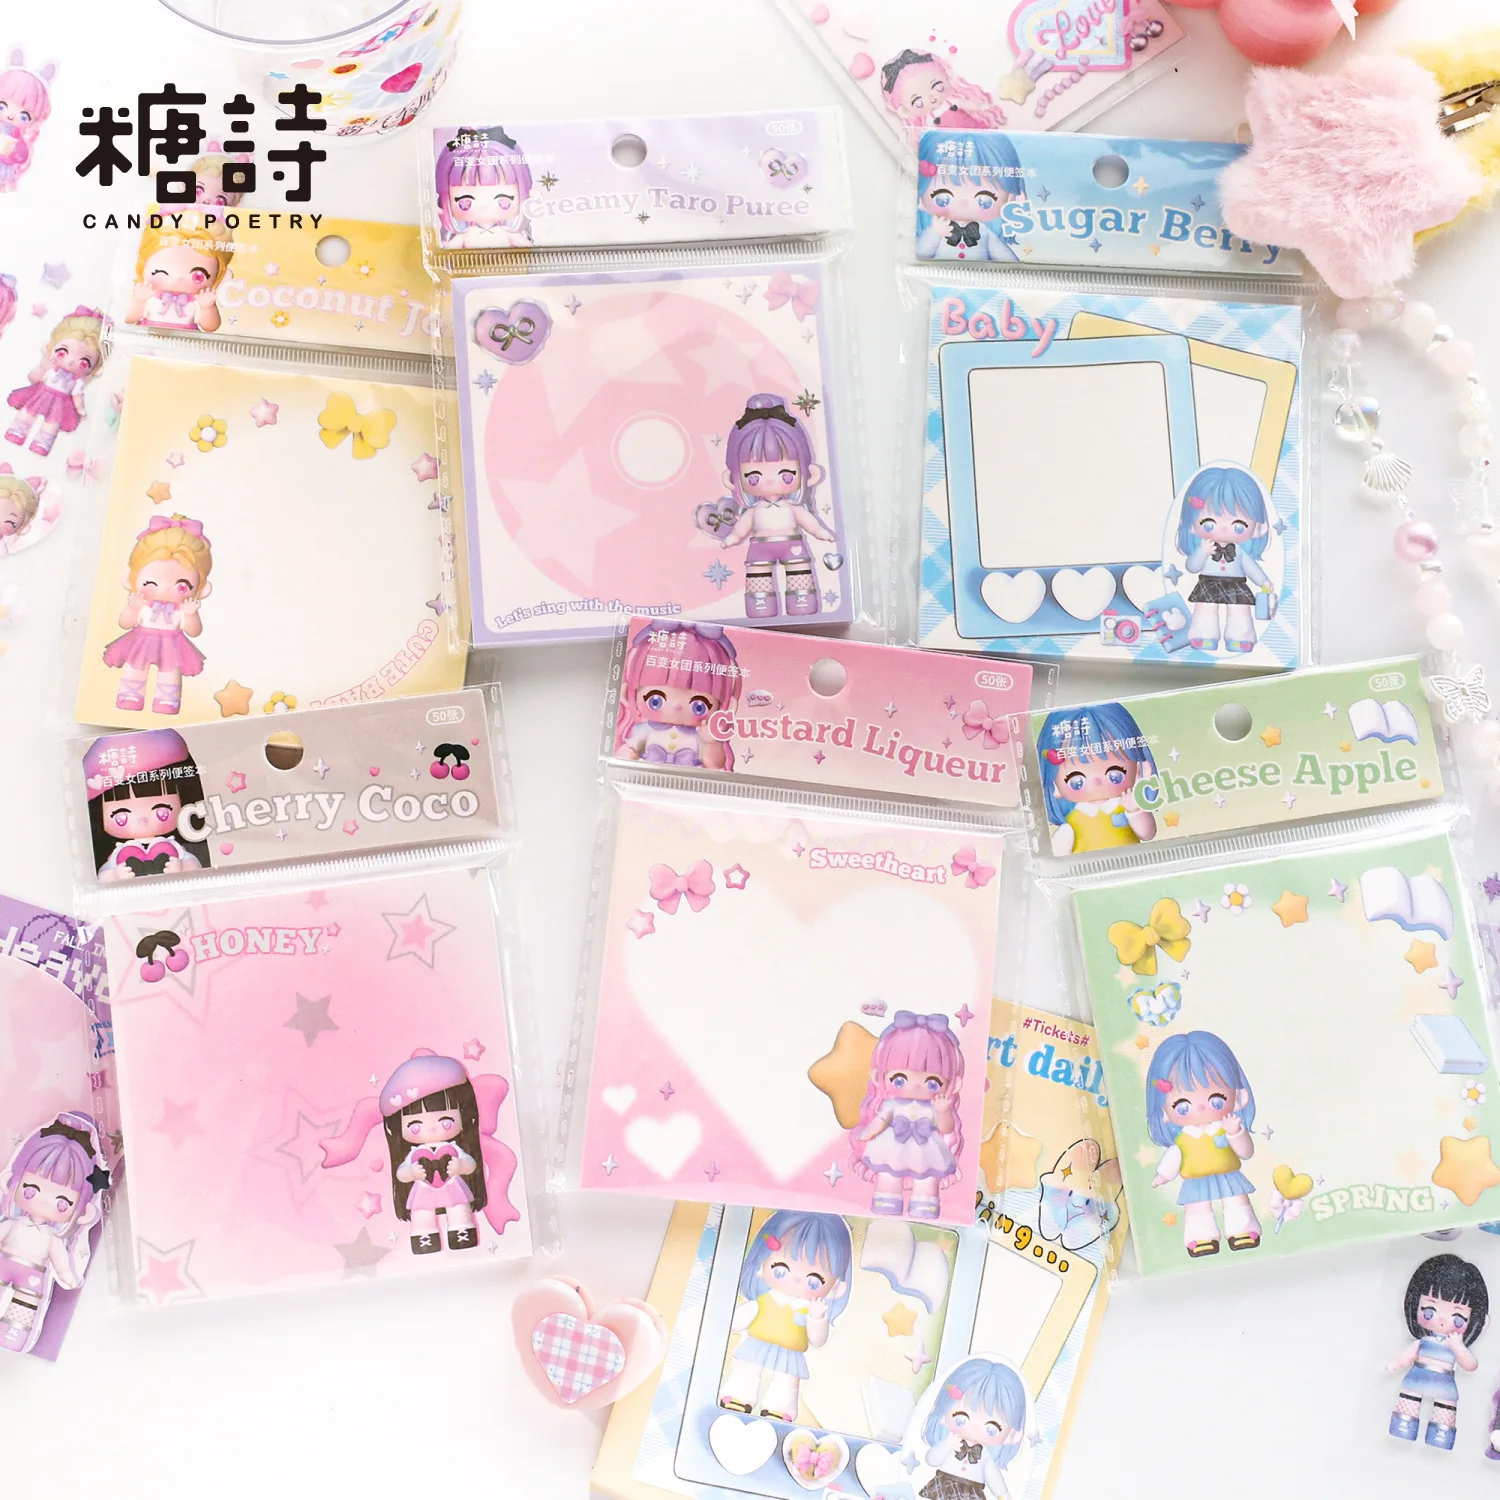 

50 Pcs/Pack Cute Cartoon Memo Pad No- Sticky Notes DIY Scrapbooking Journaling Decorative Collages Take Notes Leave a Message